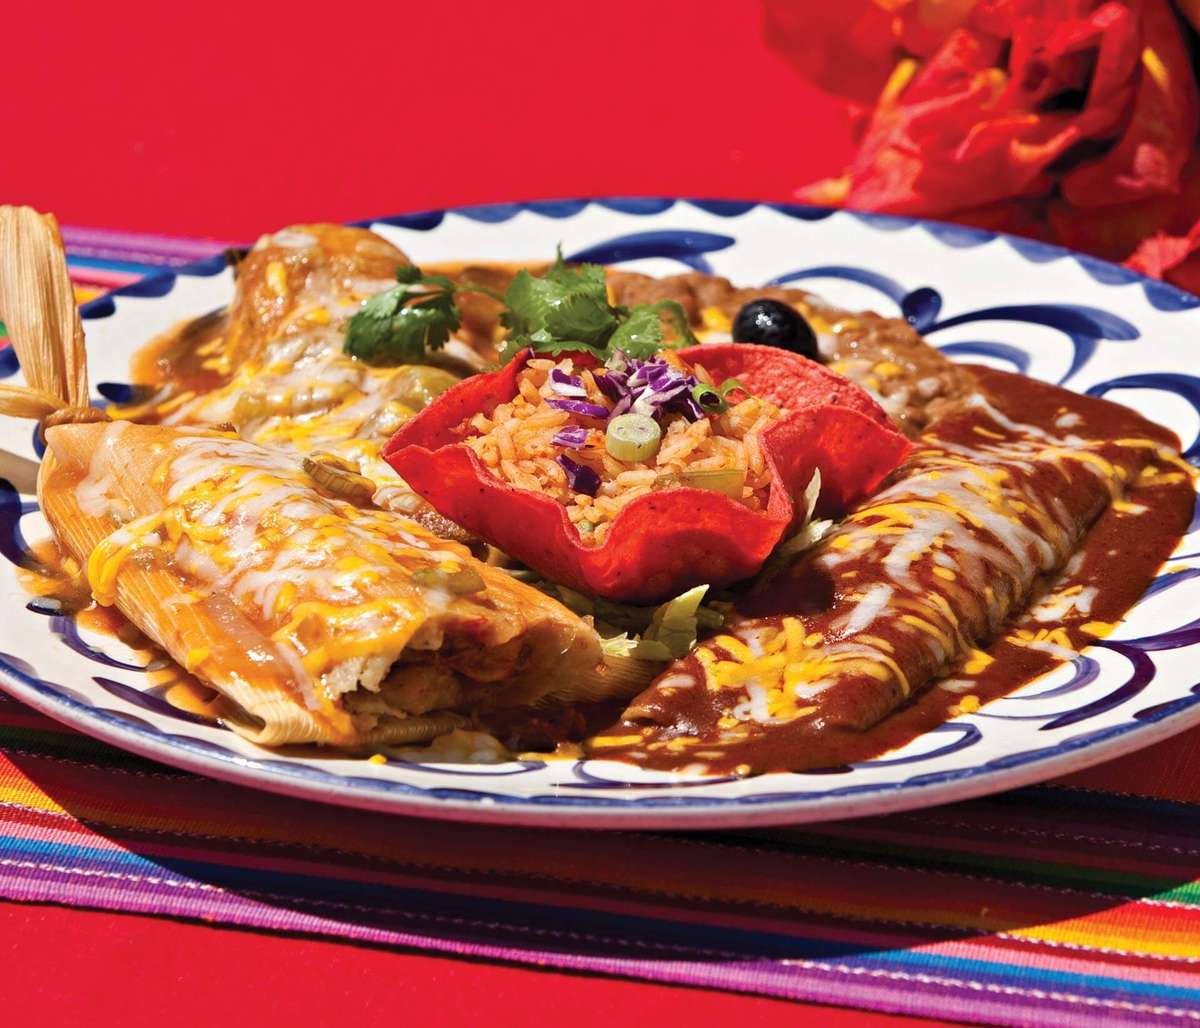 Three of Mexico's most beloved dishes on one Plate  - Chili Relleno, Tamal, and Enchilada. Each dish boasts a unique combination of flavors, textures, and aromas that will transport your senses straight to the heart of Mexico.